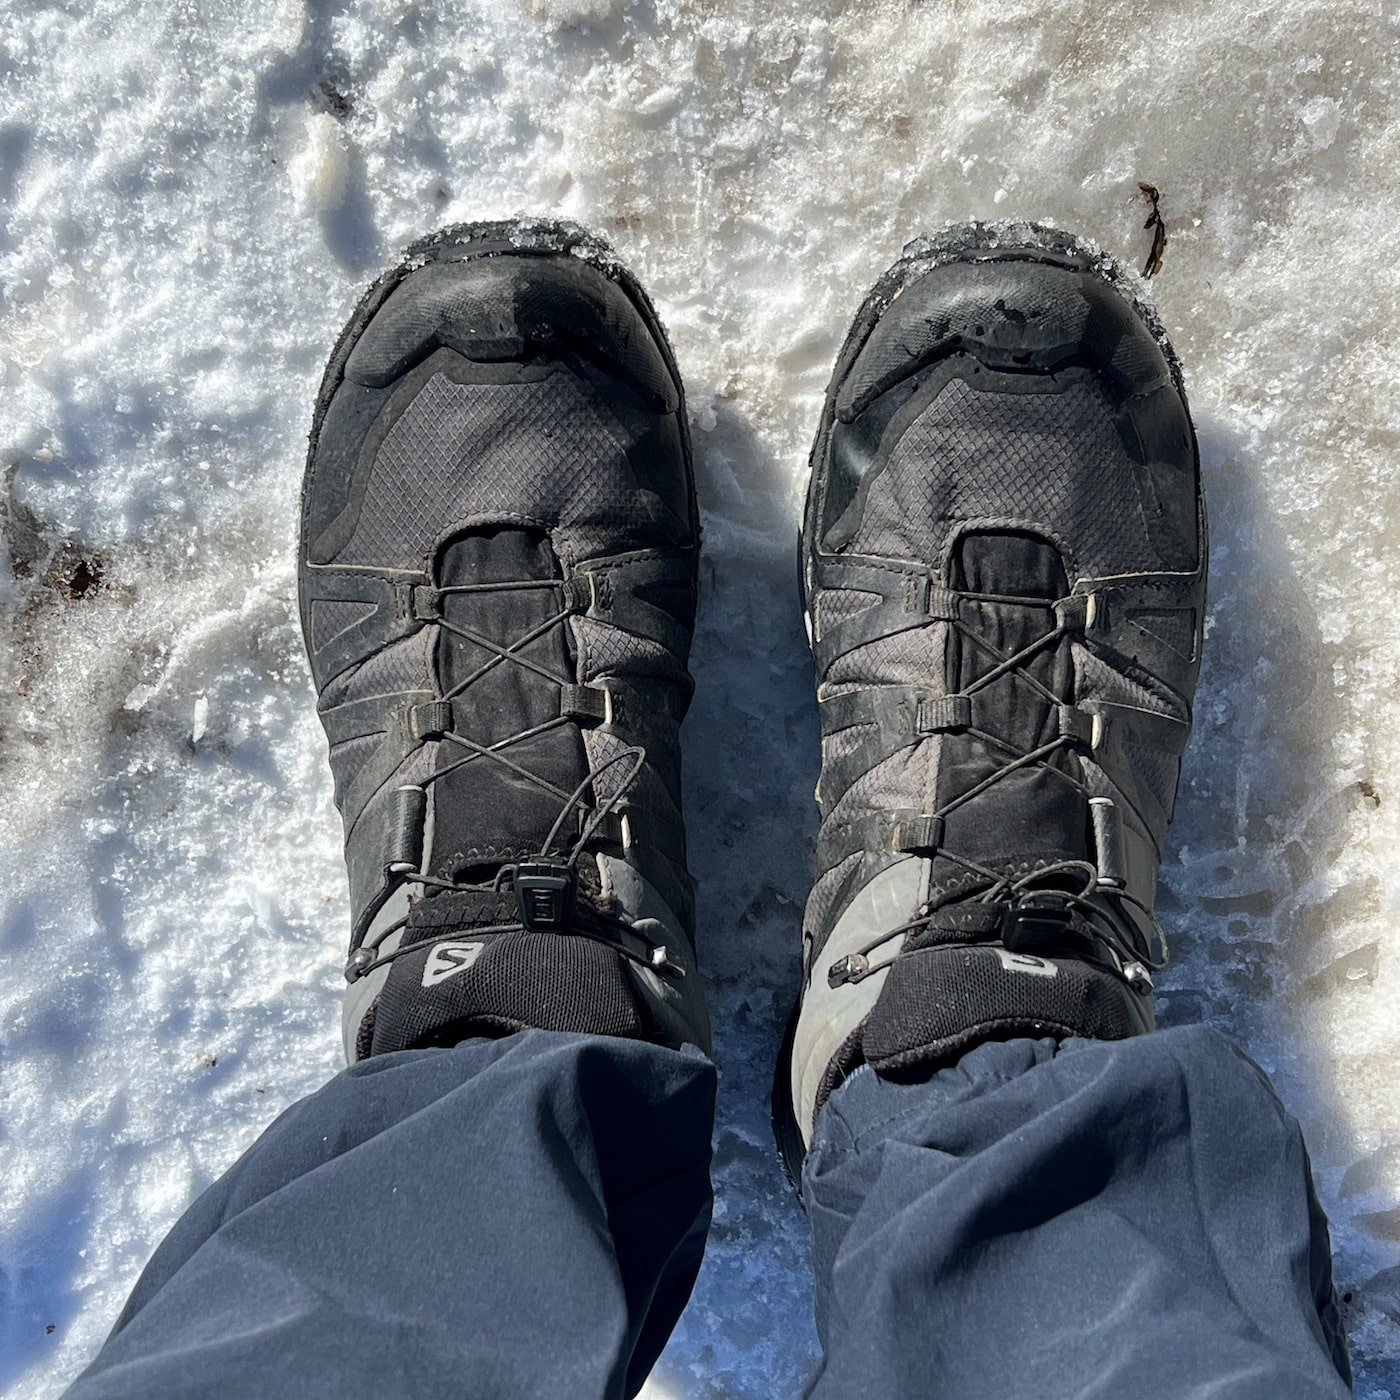 Salomon X Ultra 4 GTX hiking shoes perform well in snow, slush, and mud.